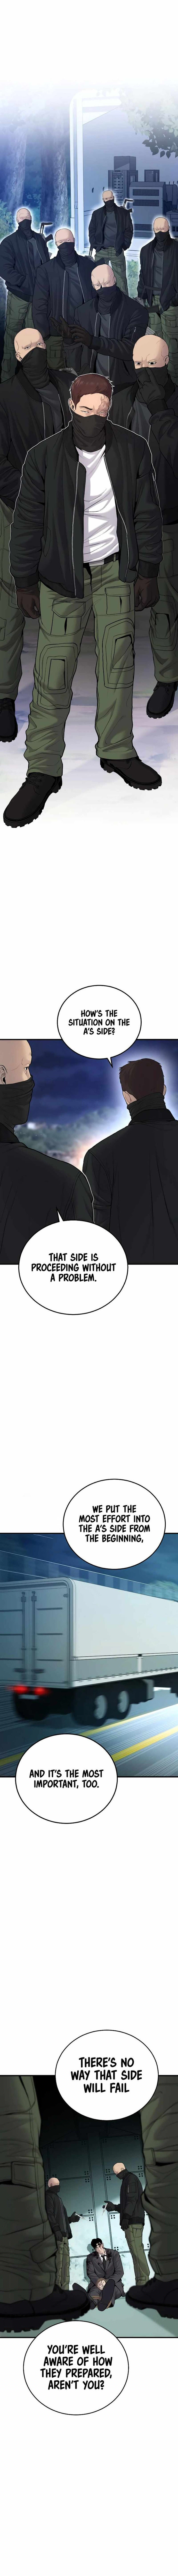 Manager Kim Chapter 74 Page 11